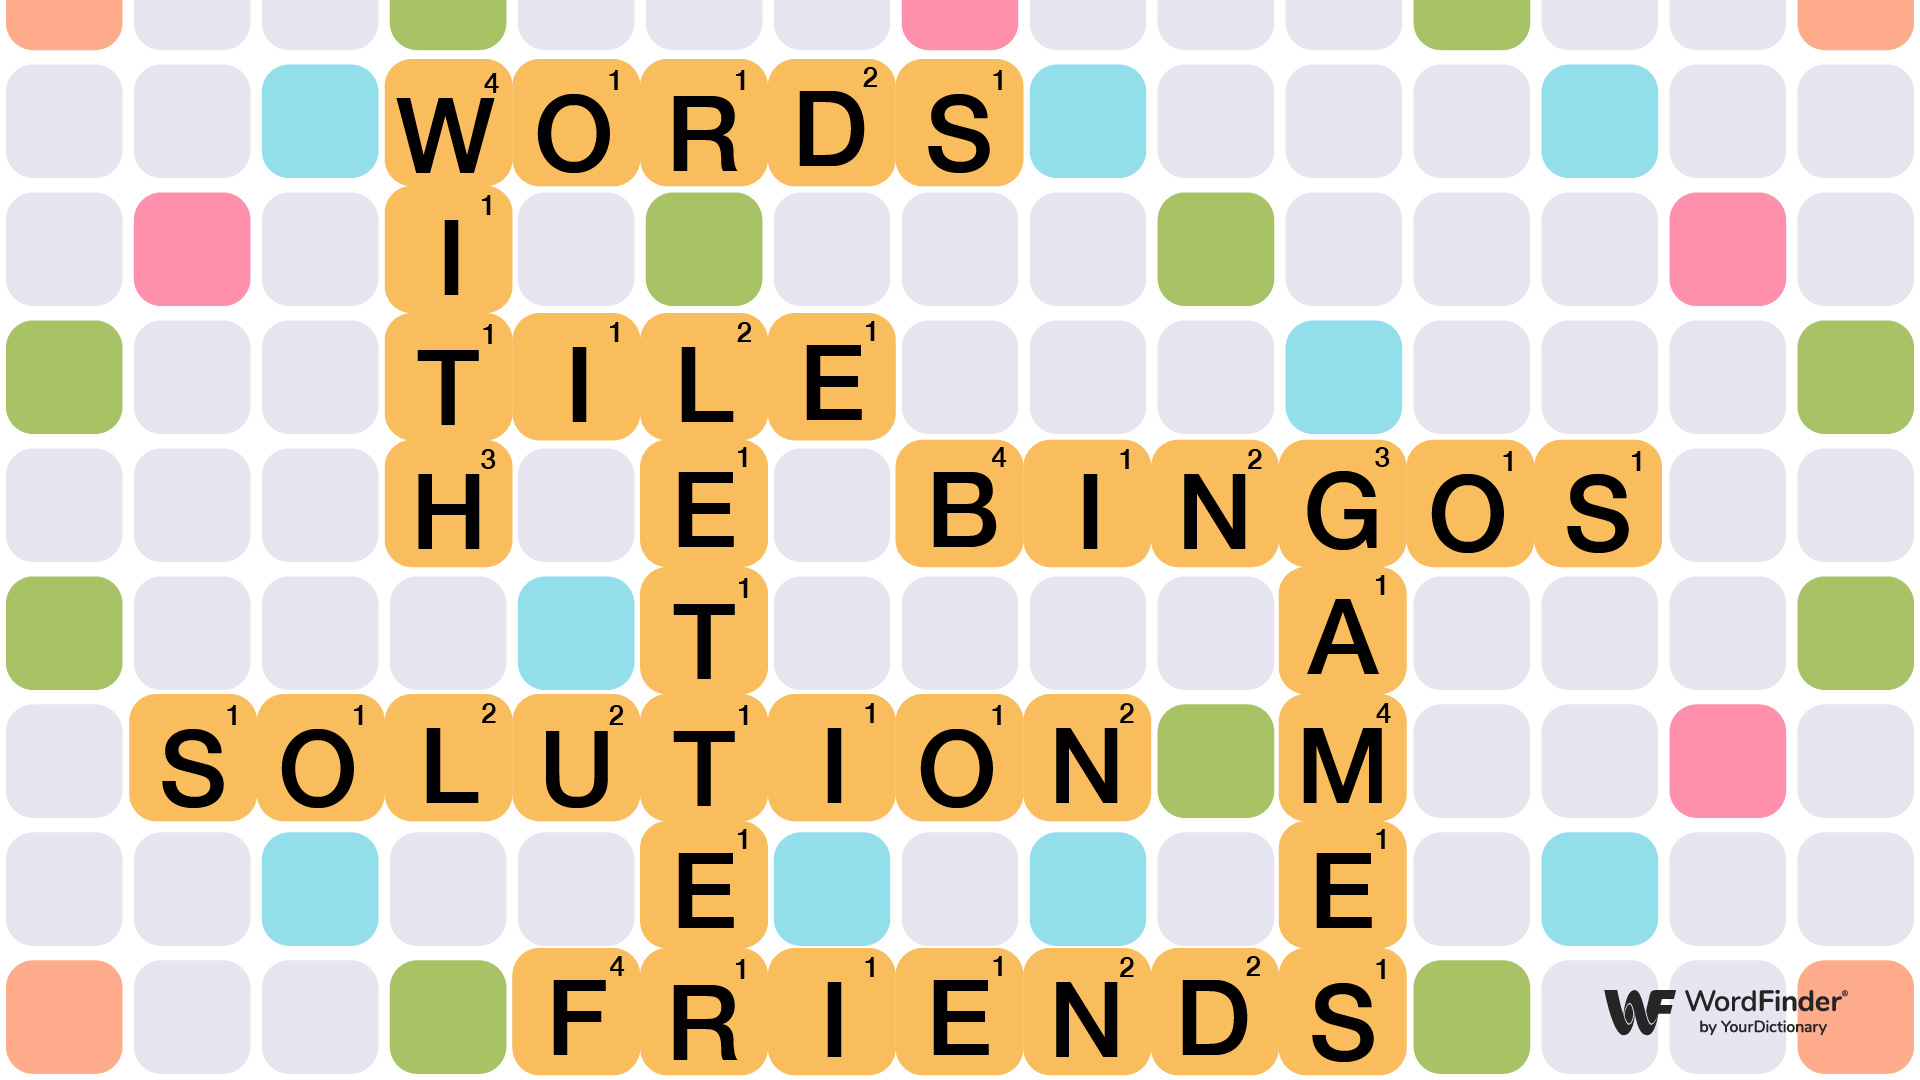 Words With Friends game board